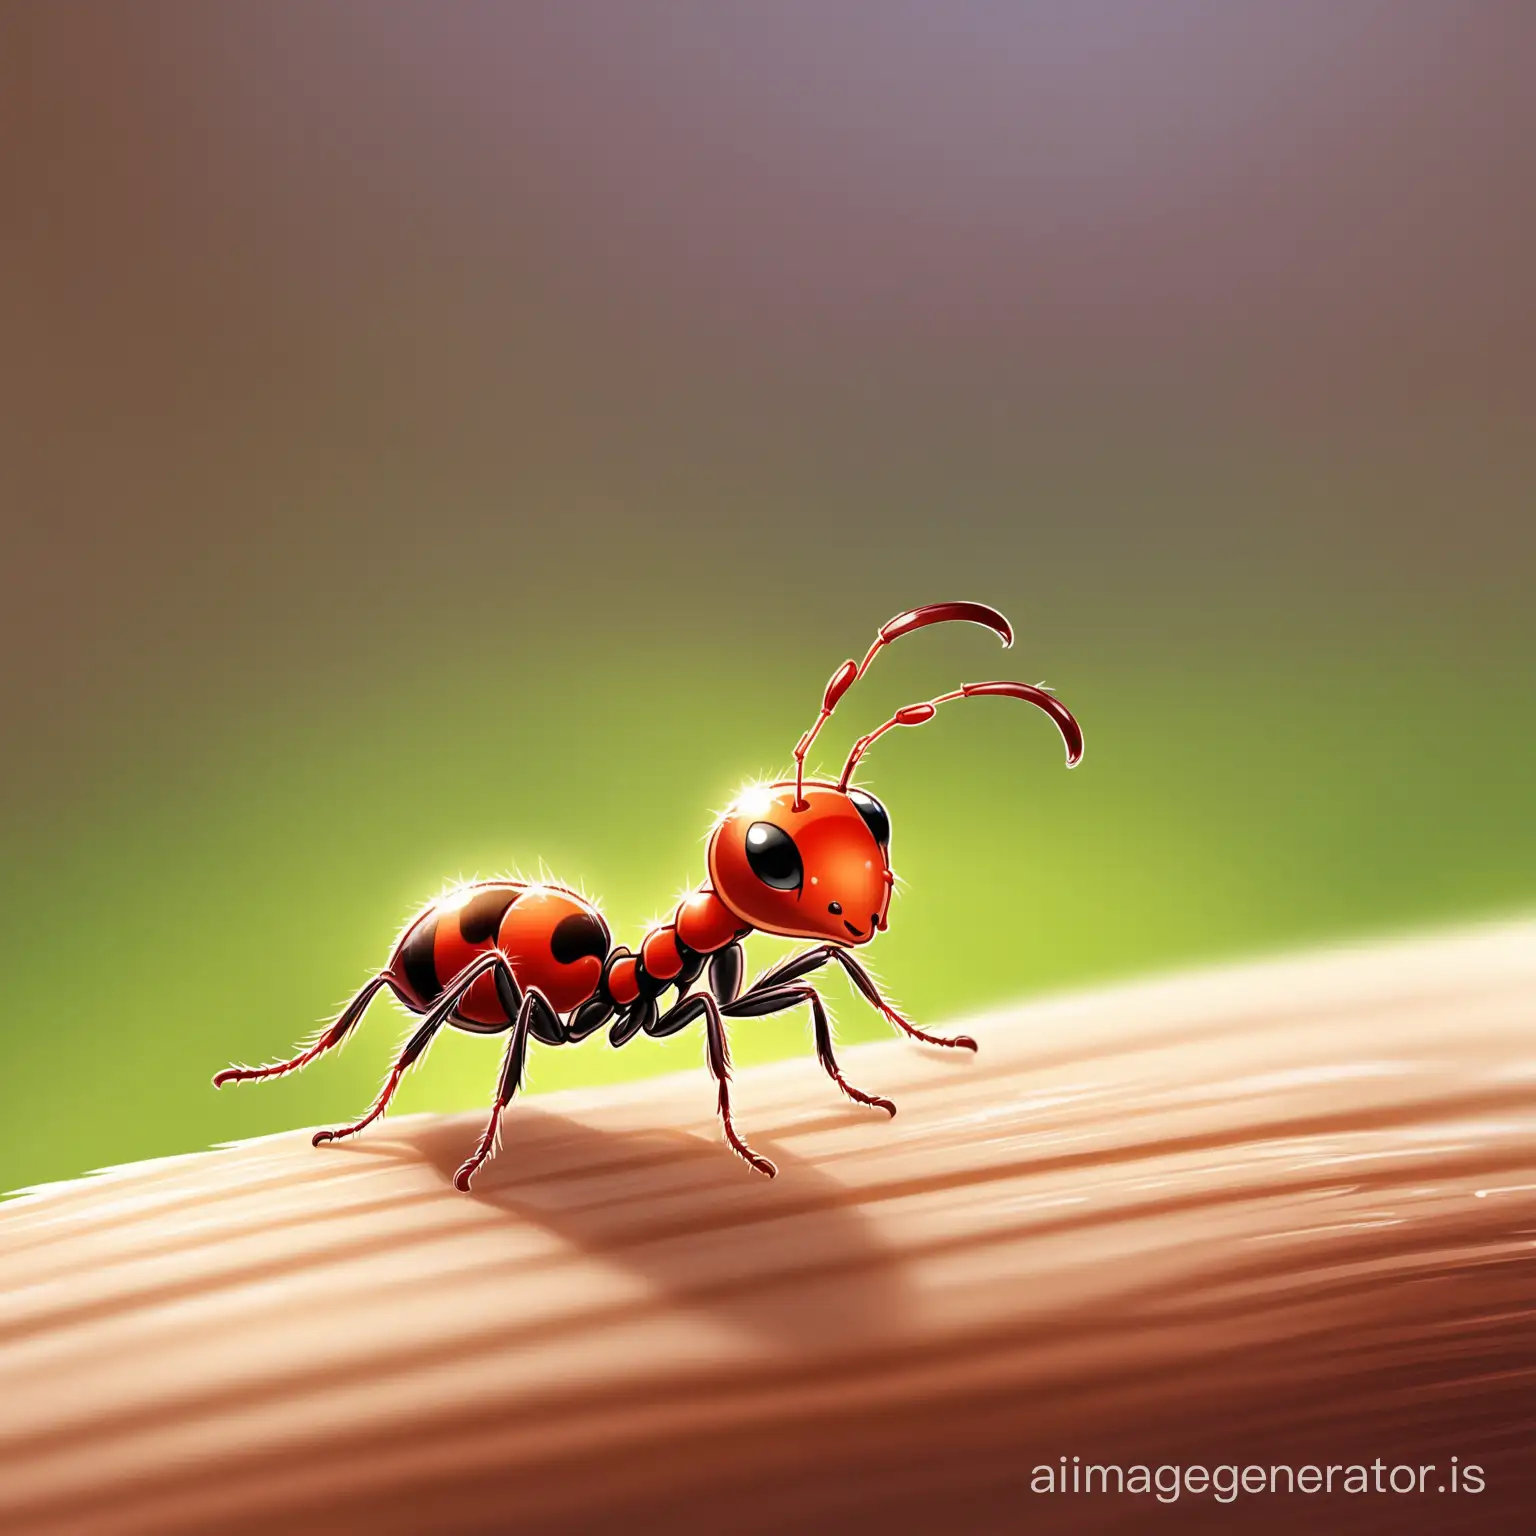 Charming-Ant-Adventure-in-a-Lush-Garden